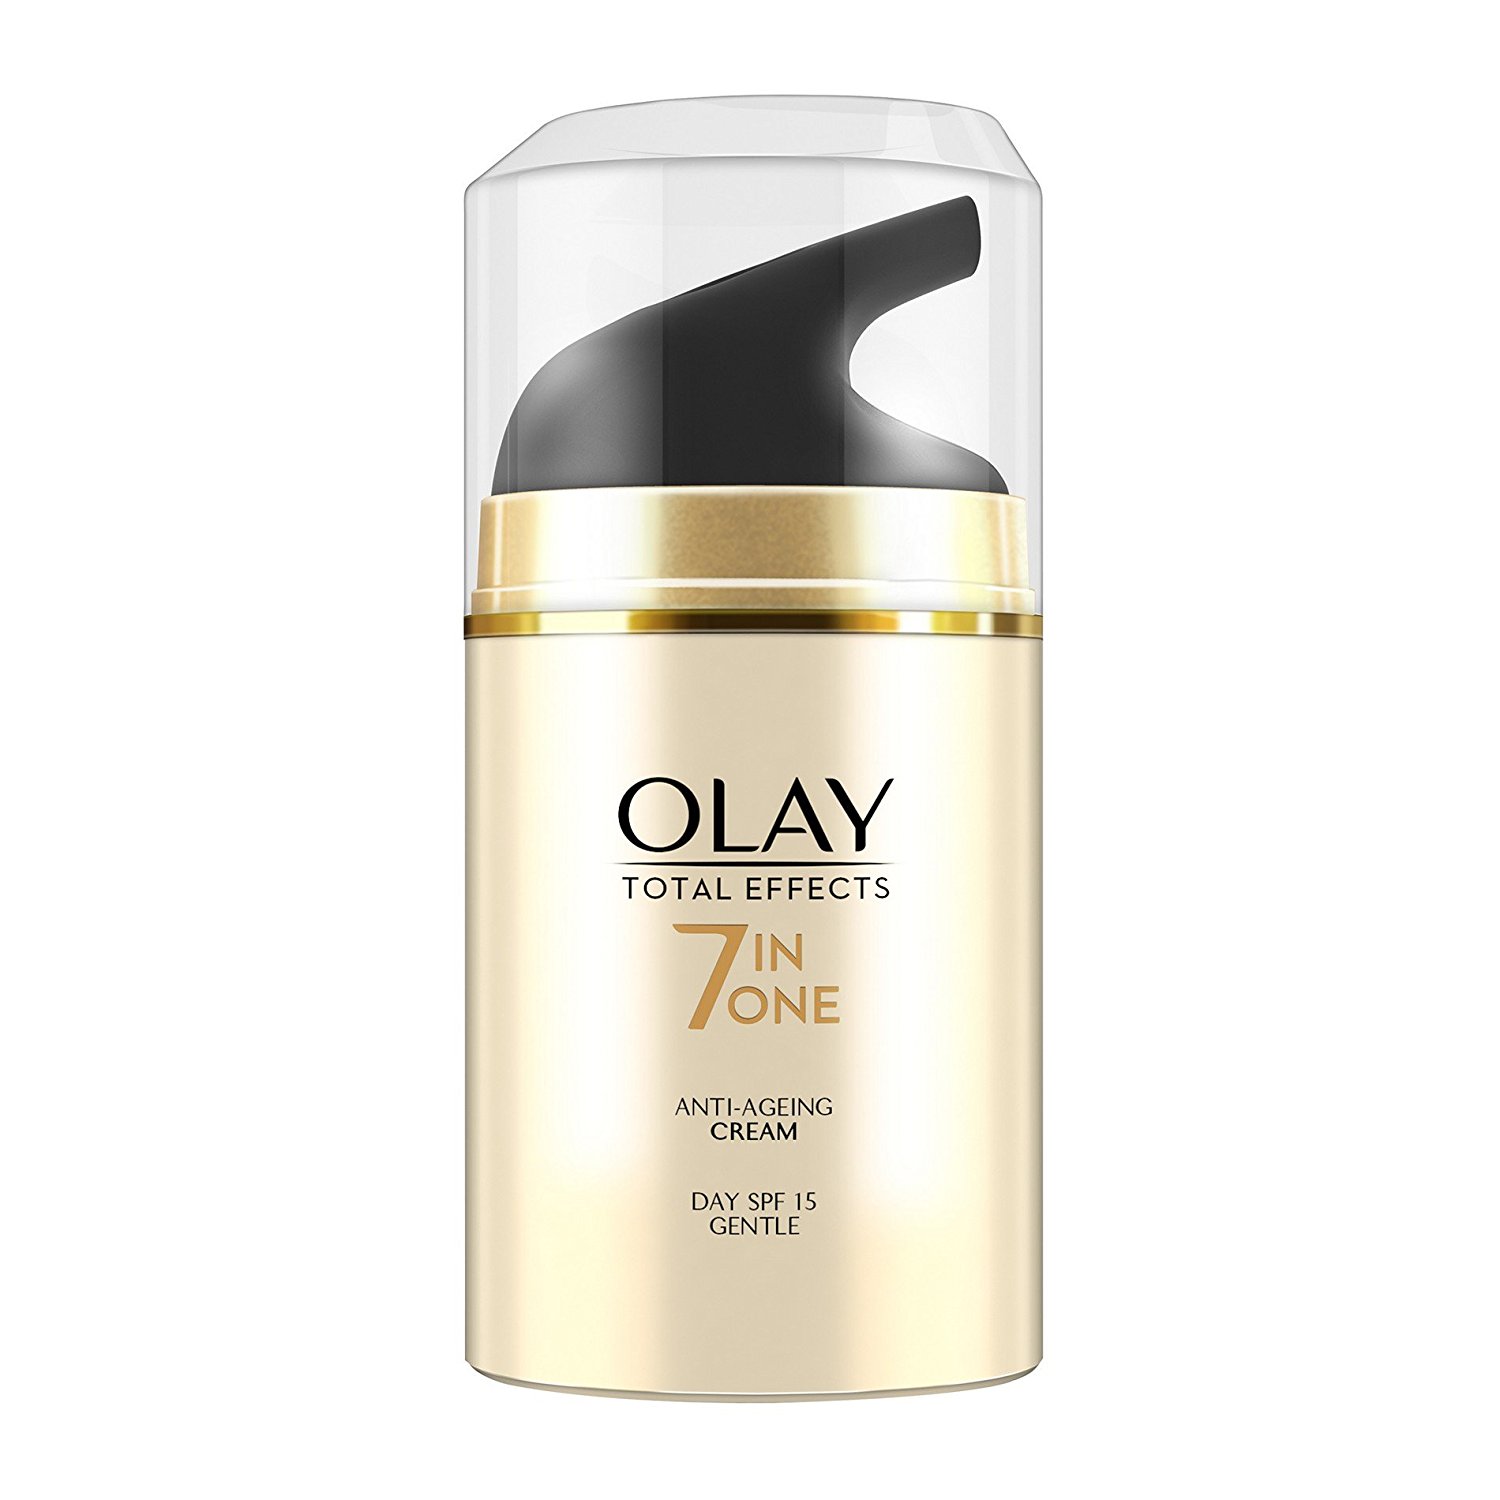 Olay Total Effects 7-in-1 Anti Aging Skin Cream Gentle SPF 15, 50g